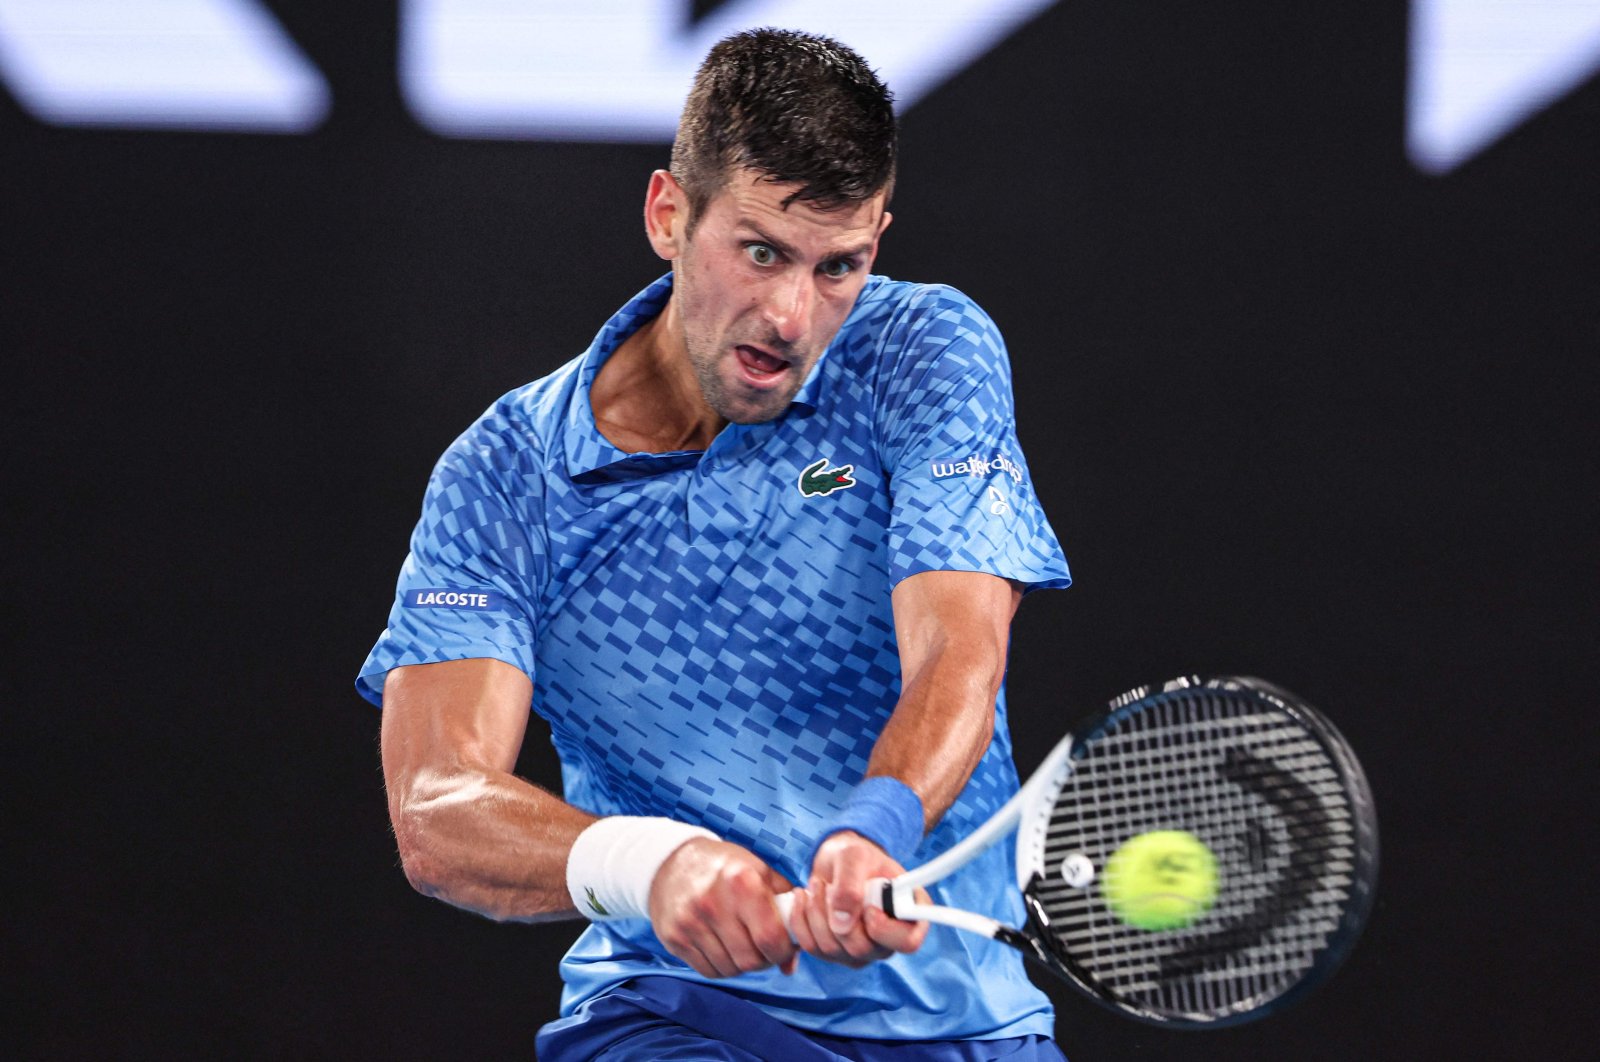 Serbia&#039;s Novak Djokovic hits a return against Tommy Paul of the U.S. during their men&#039;s singles semifinal match on Day 12 of the Australian Open tennis tournament, Melbourne, Australia, Jan. 27, 2023. (AFP Photo)